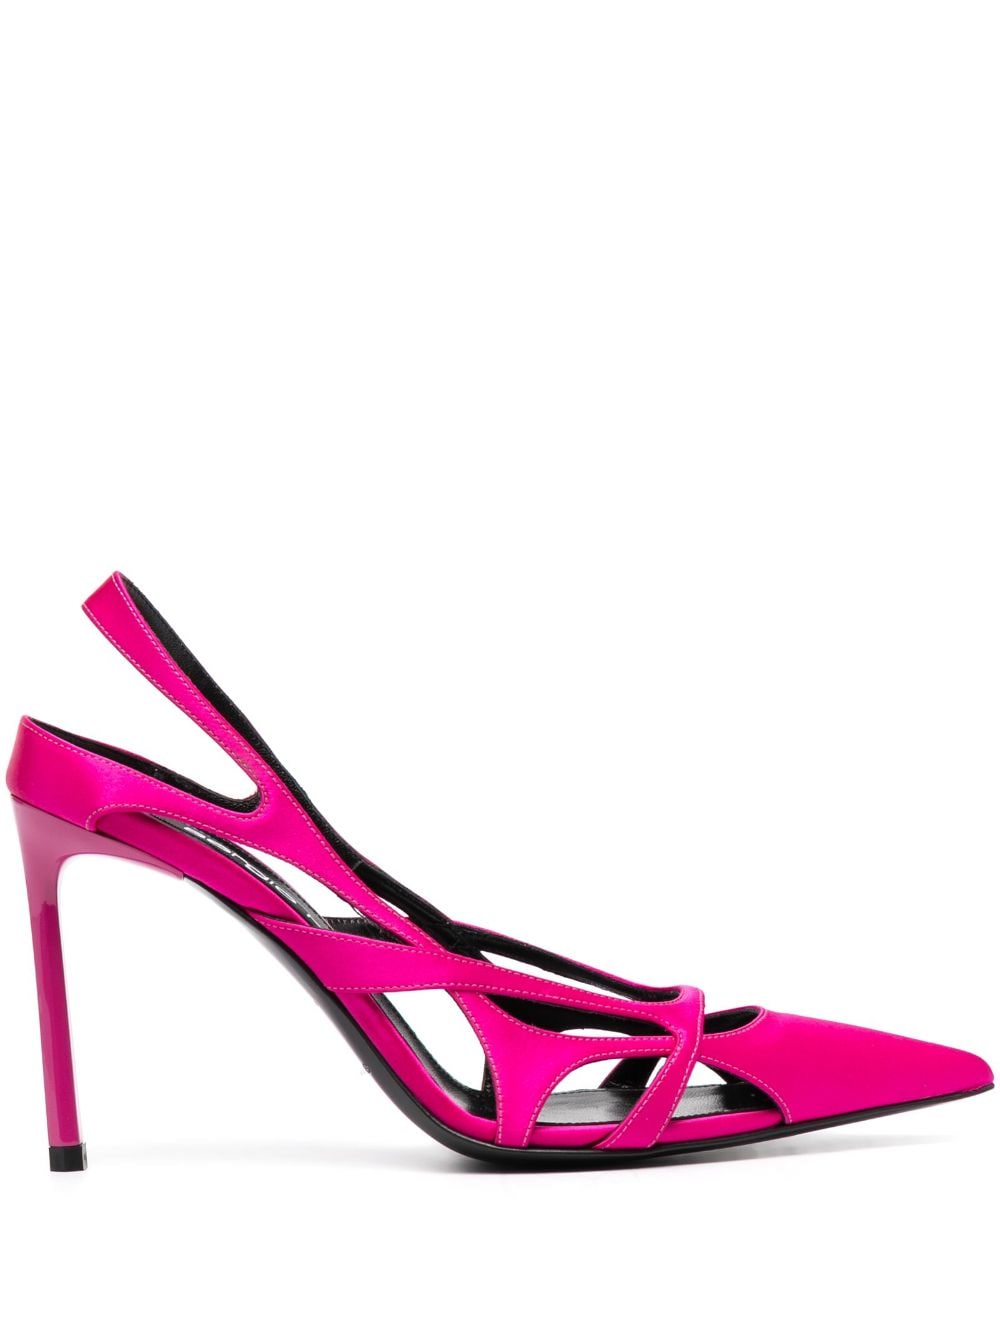 Sergio Rossi 100mm Pointed Slingback Pumps In Pink